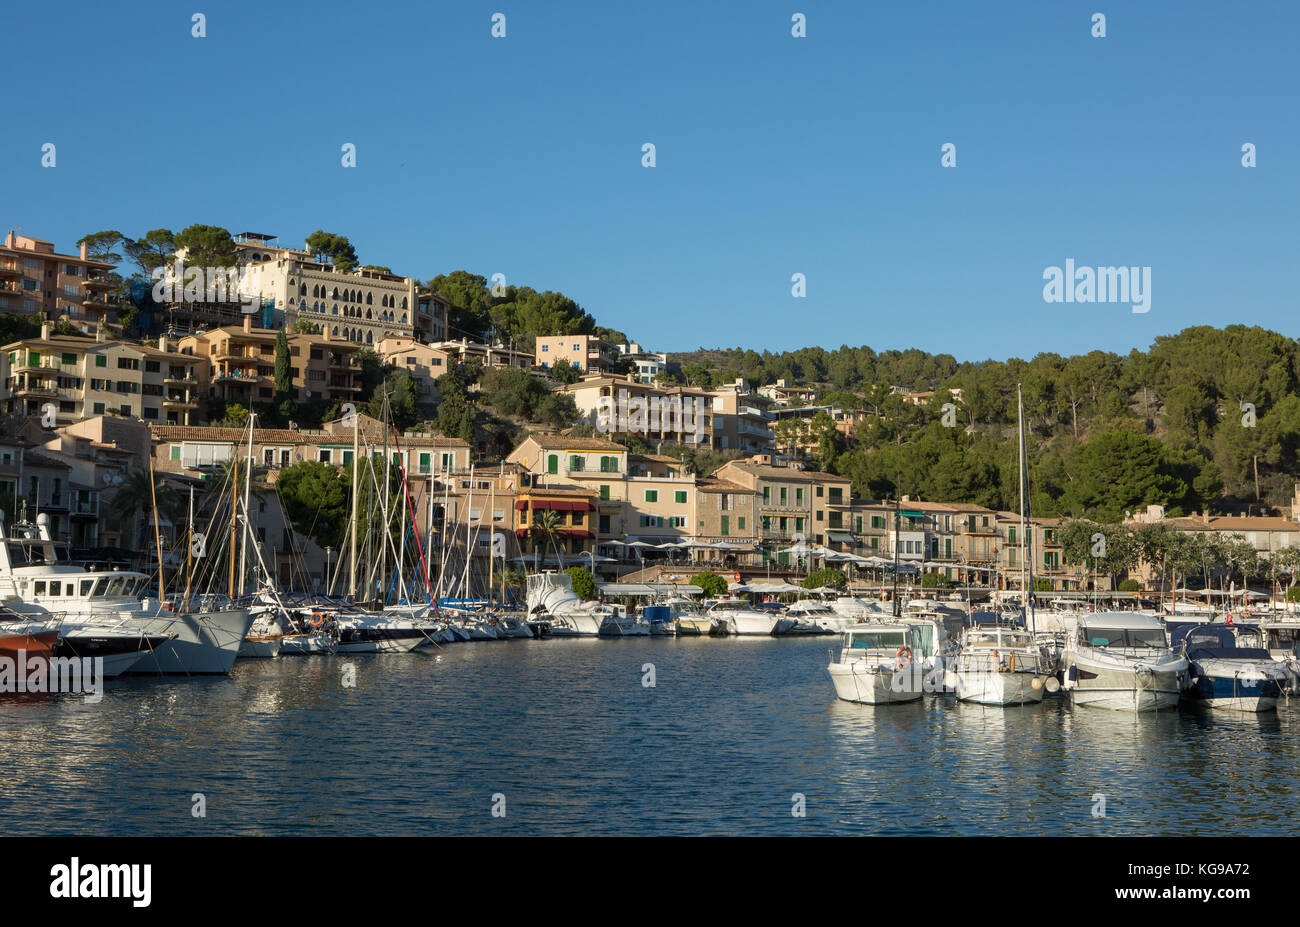 Boats moored at harbour, town in background, Port de Soller, Majorca, Balearic Islands, Spain. Stock Photo